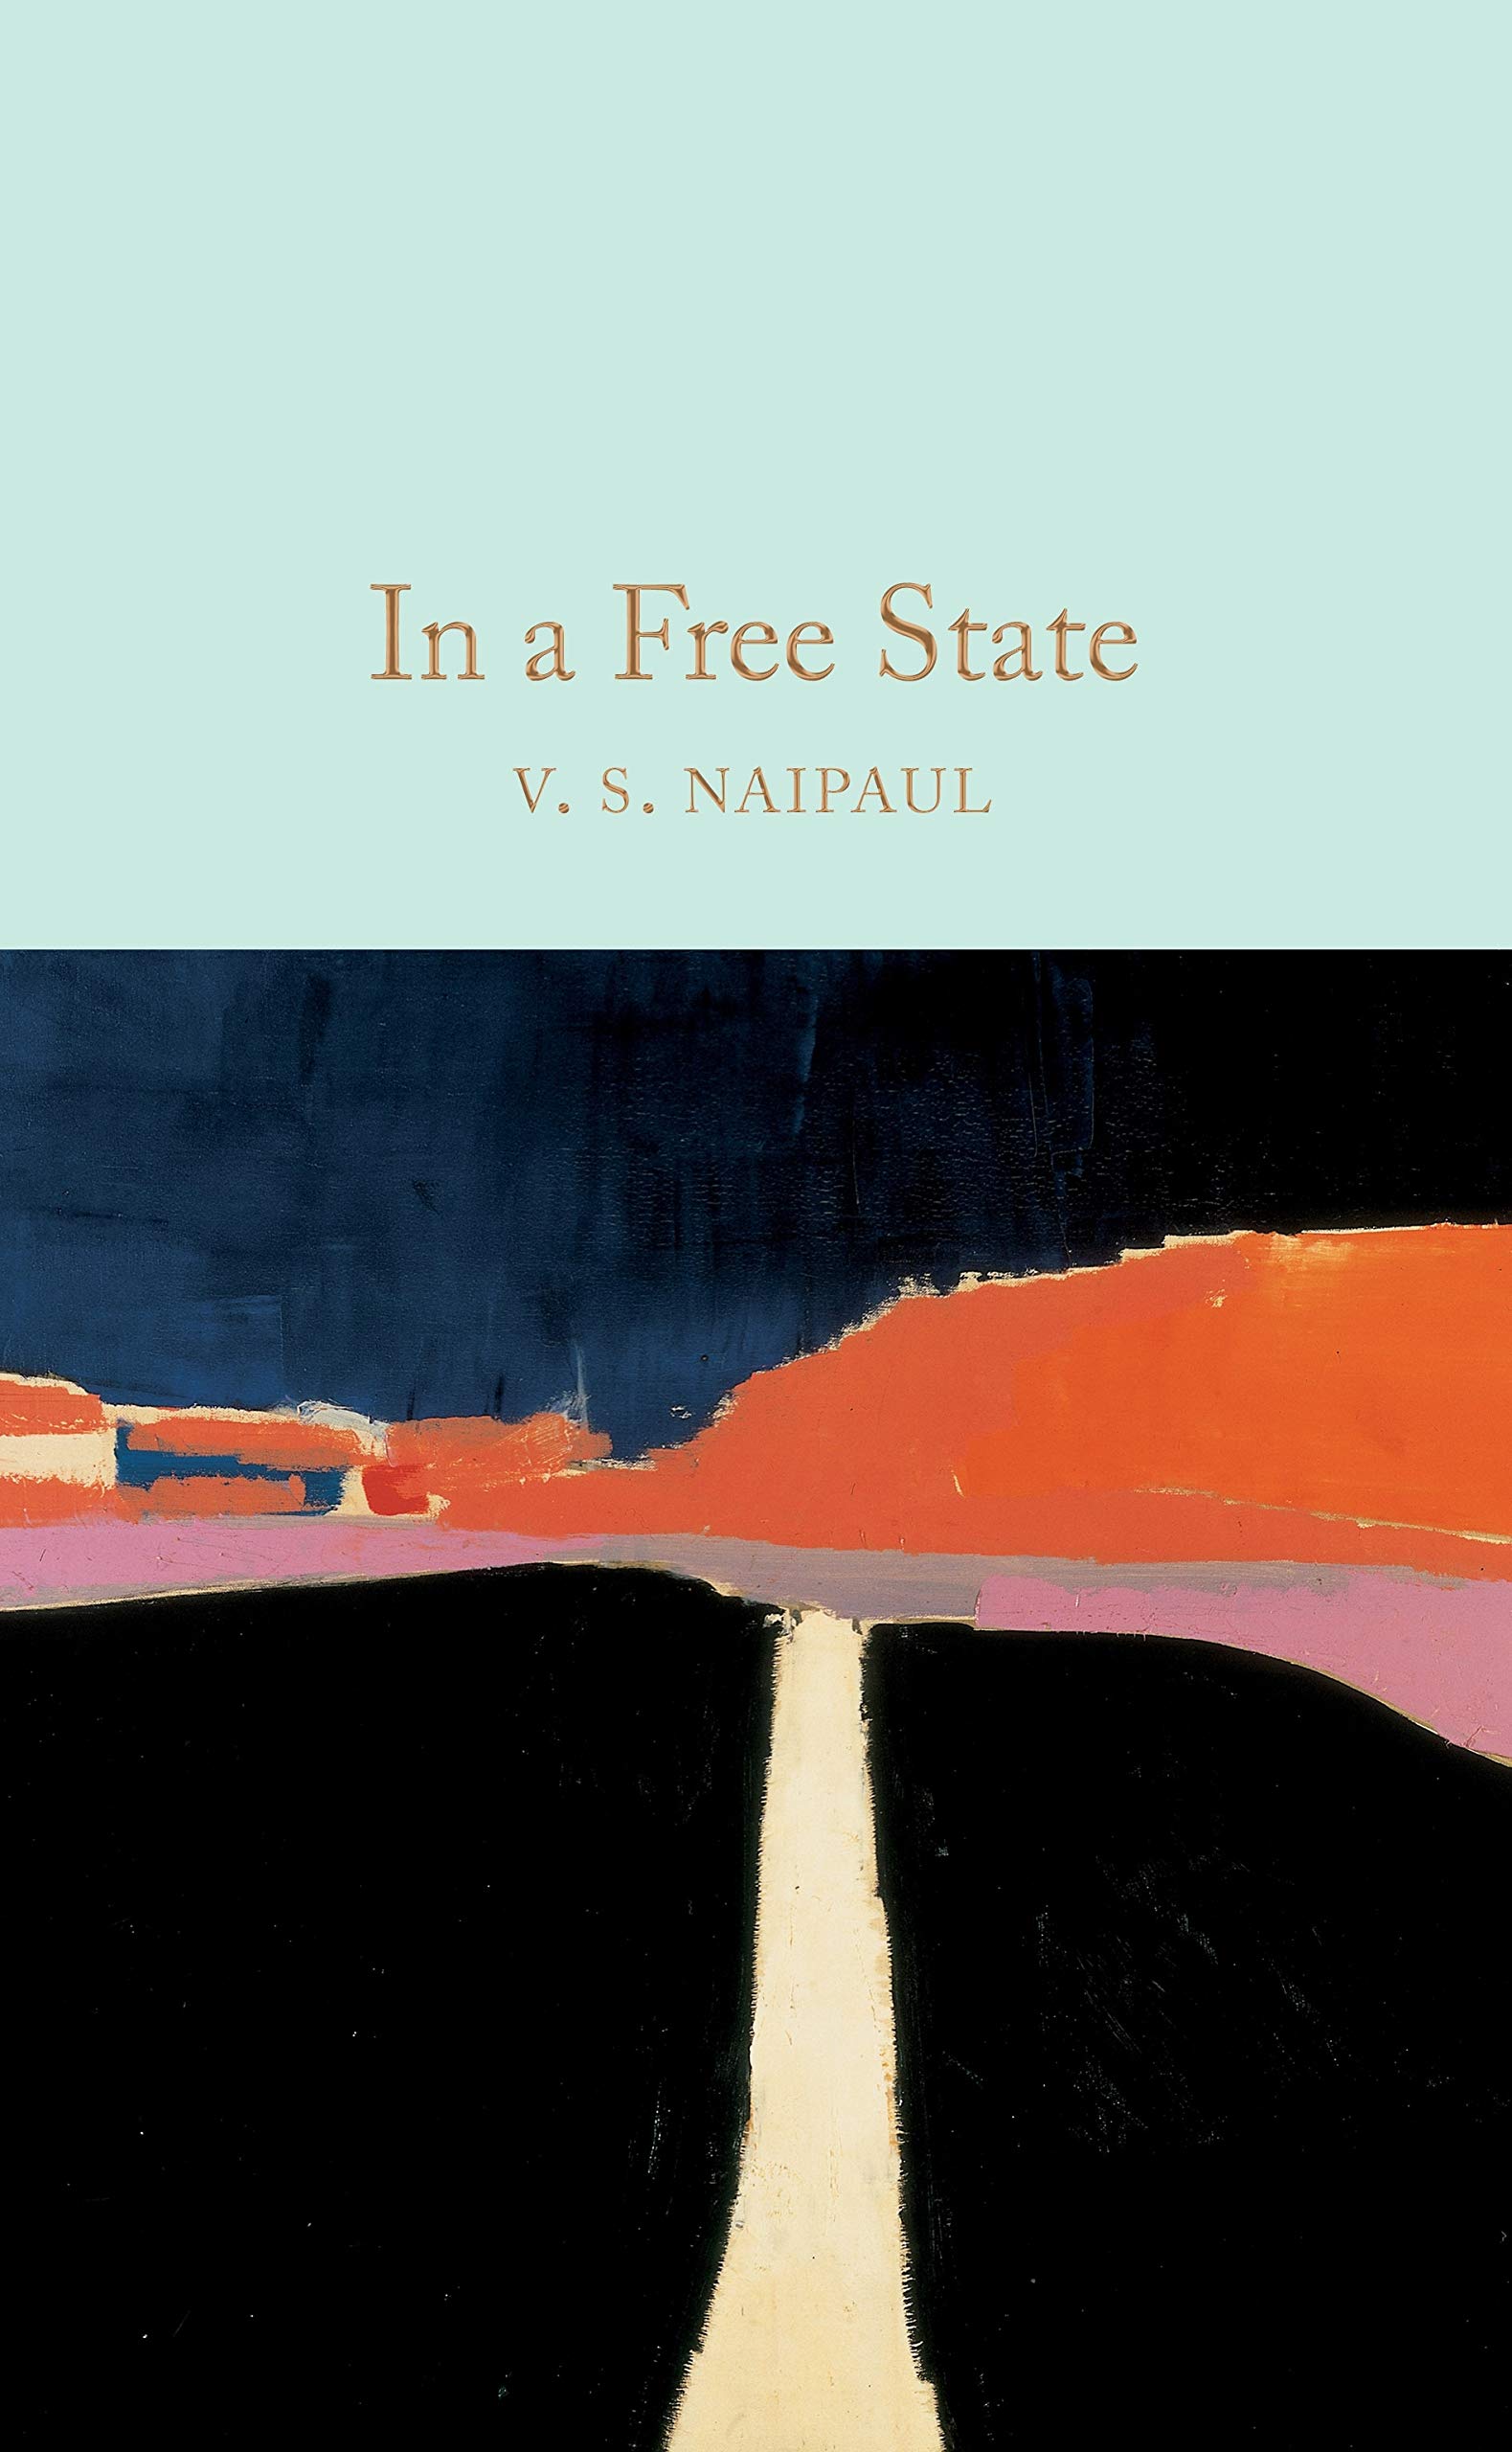 In a Free State | V. S. Naipaul image0